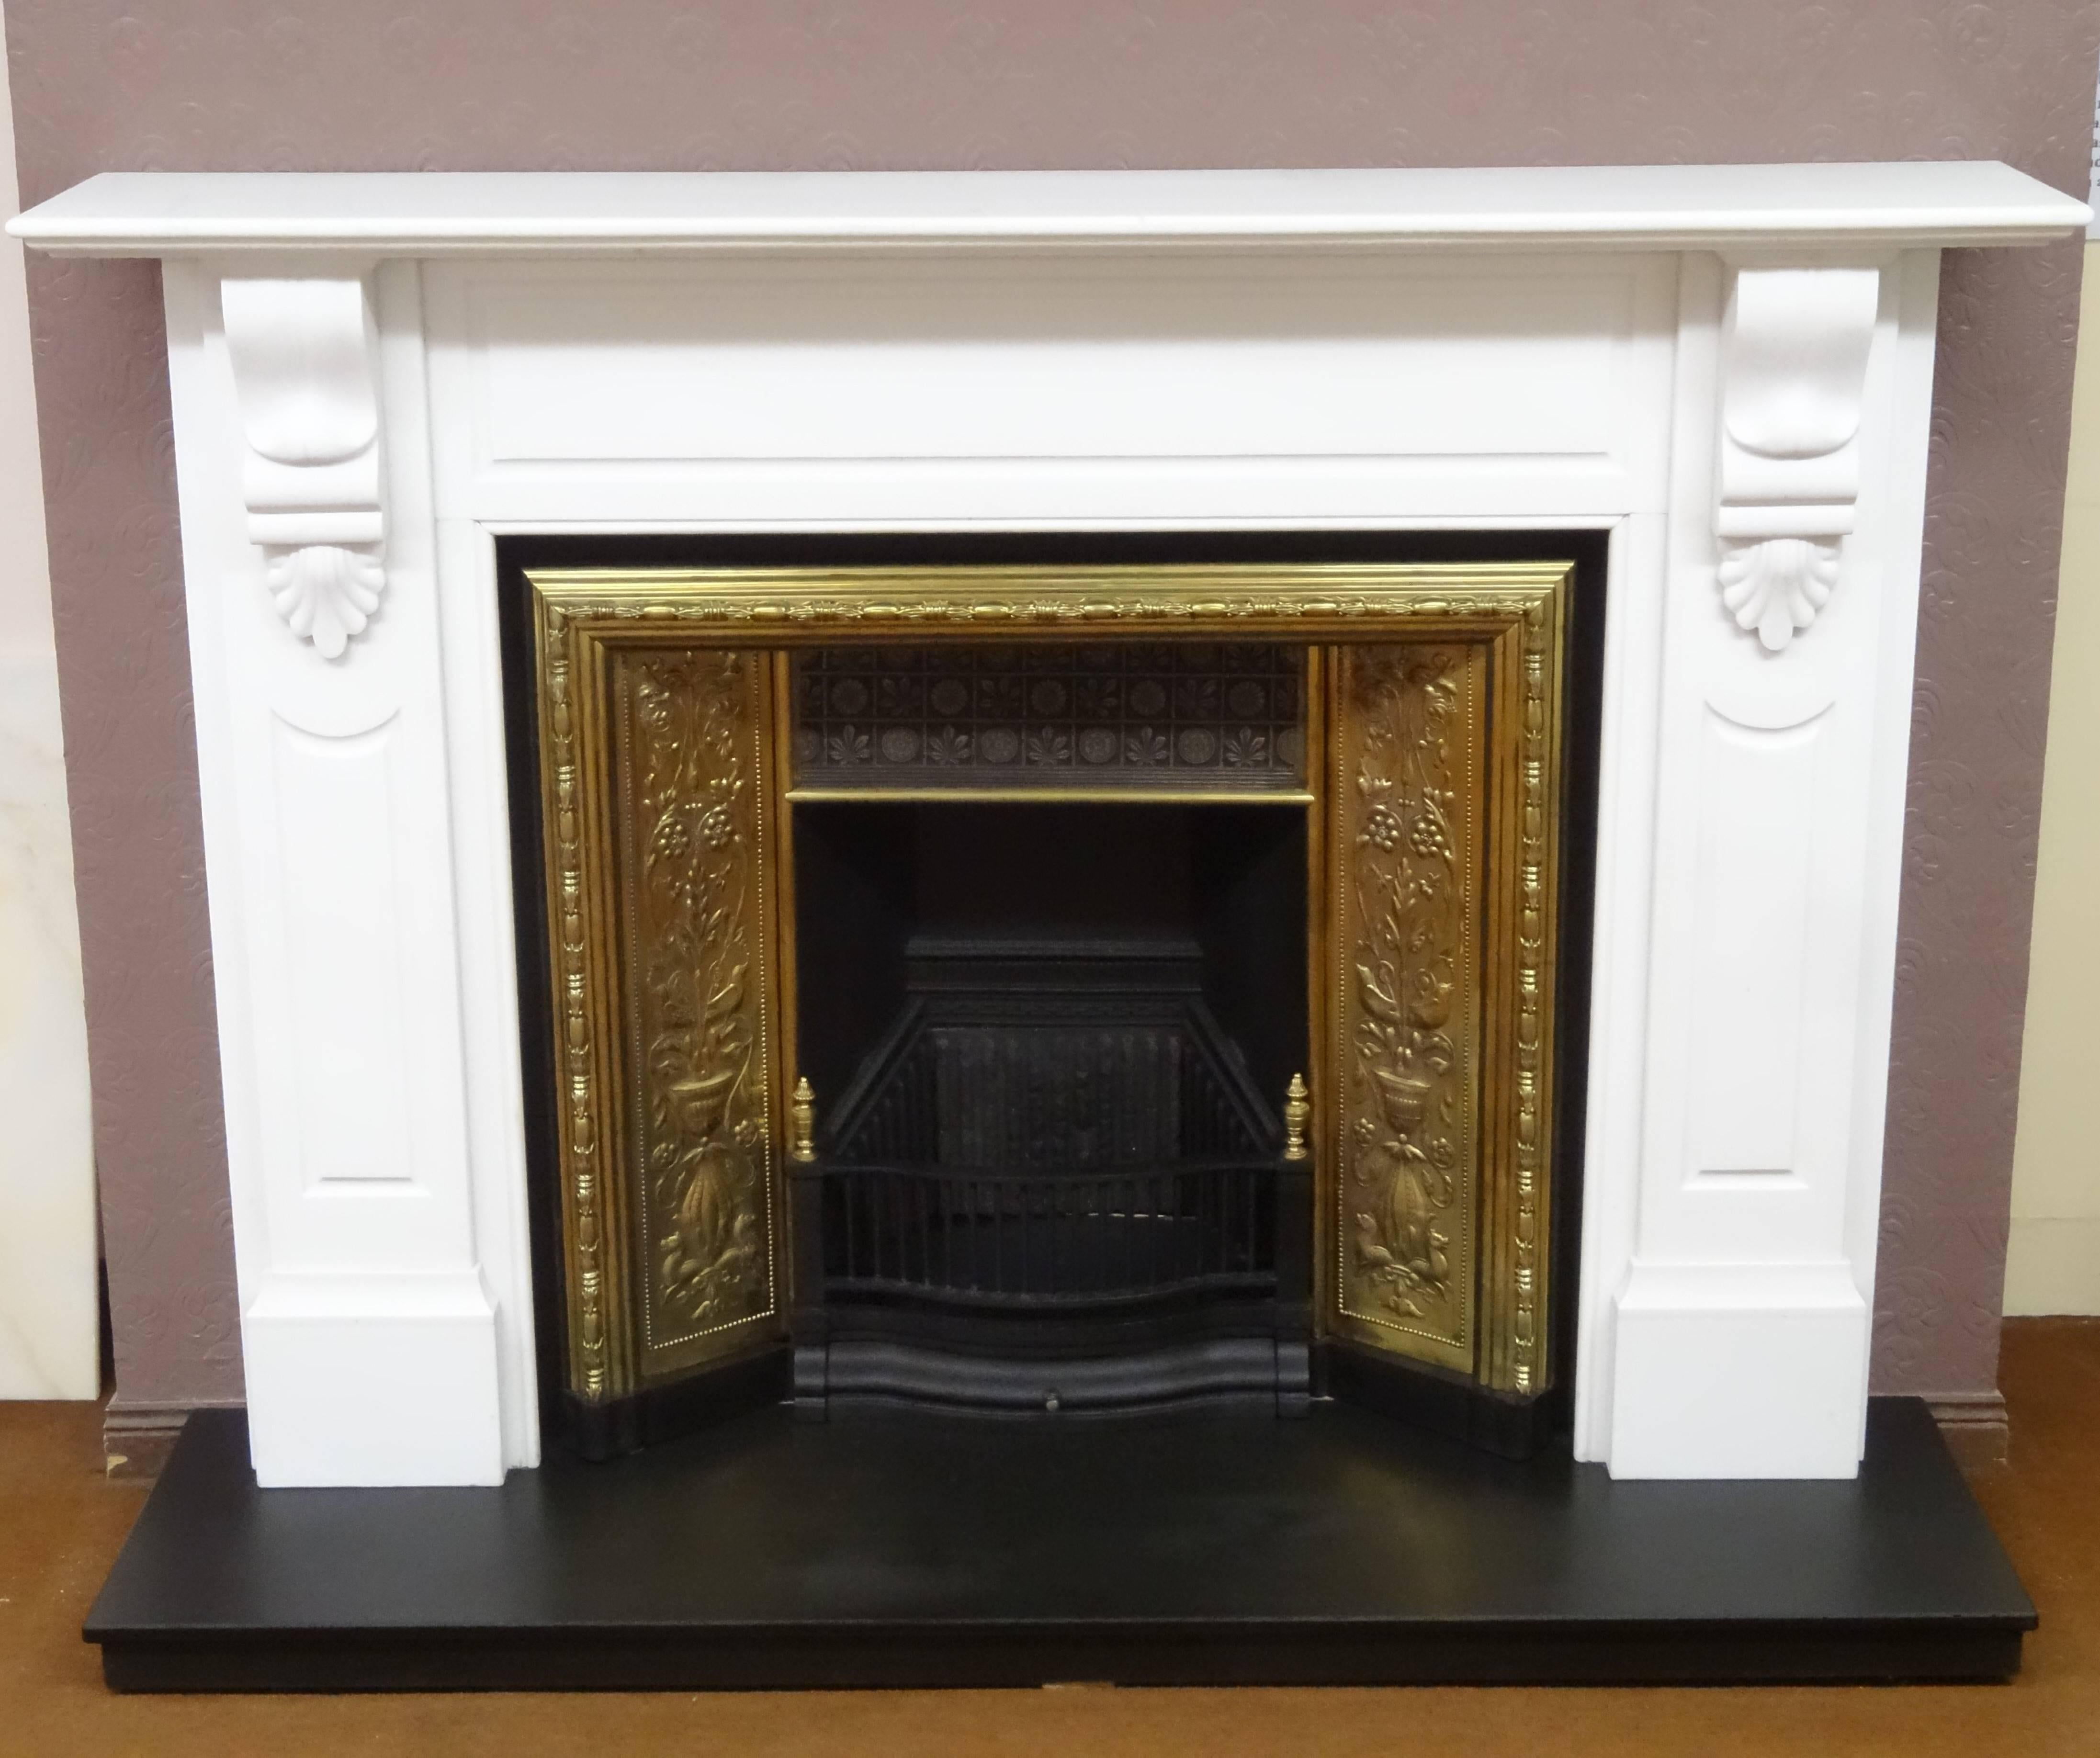 Early 20th century reproduction of Victorian Fire Surround in pure white marble. The Fire Surround has recessed panels on the frieze and jambs, hand carved corbels support a two tier mantel. The Fire Surround is complimented with a 19th century